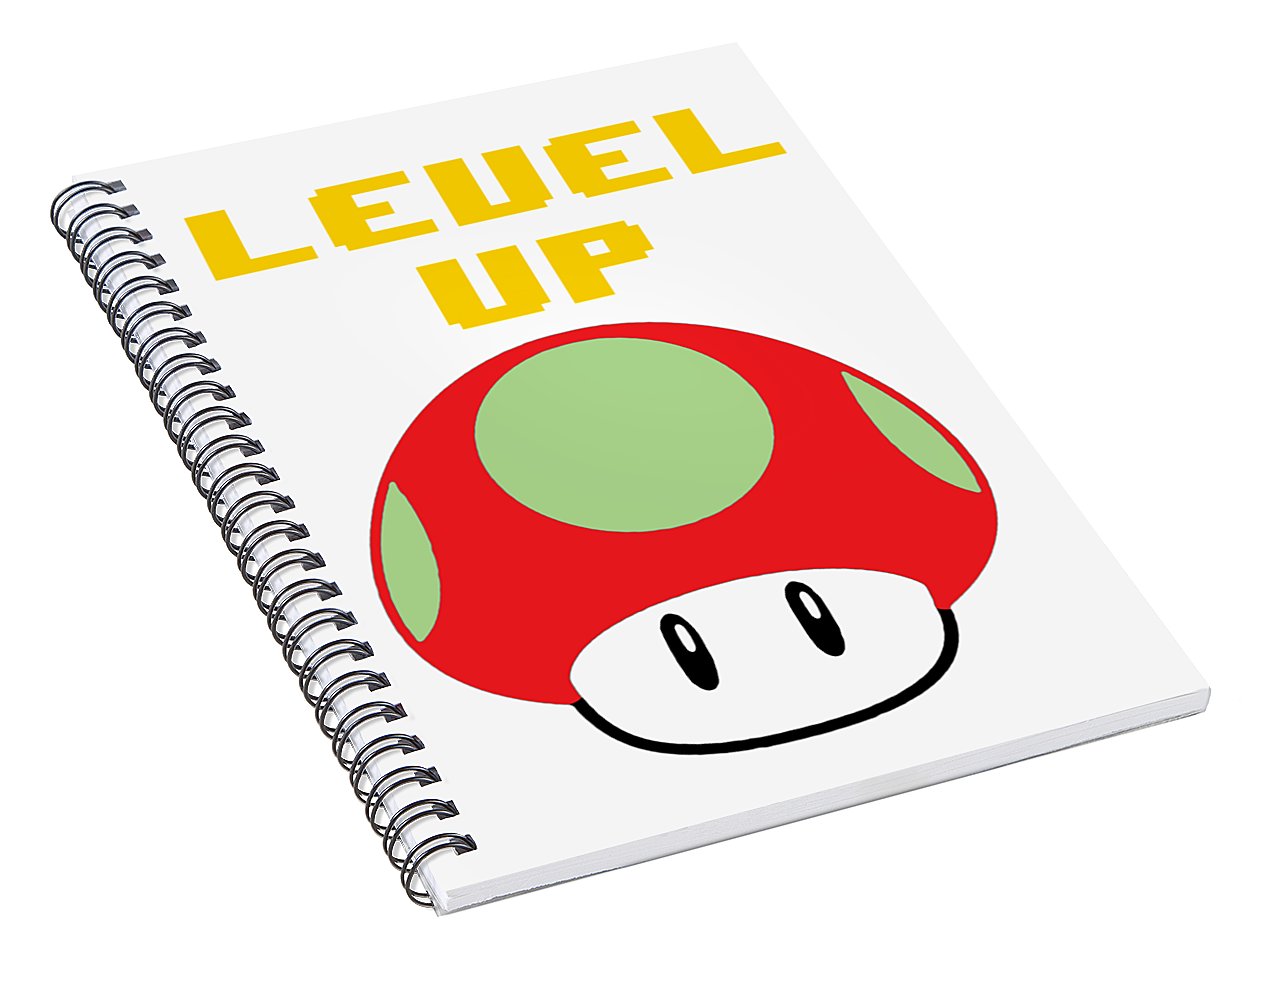 Level Up Mushroom, Classic 8 Bit Entertainment System Characters. Babies From The 80's.  - Spiral Notebook